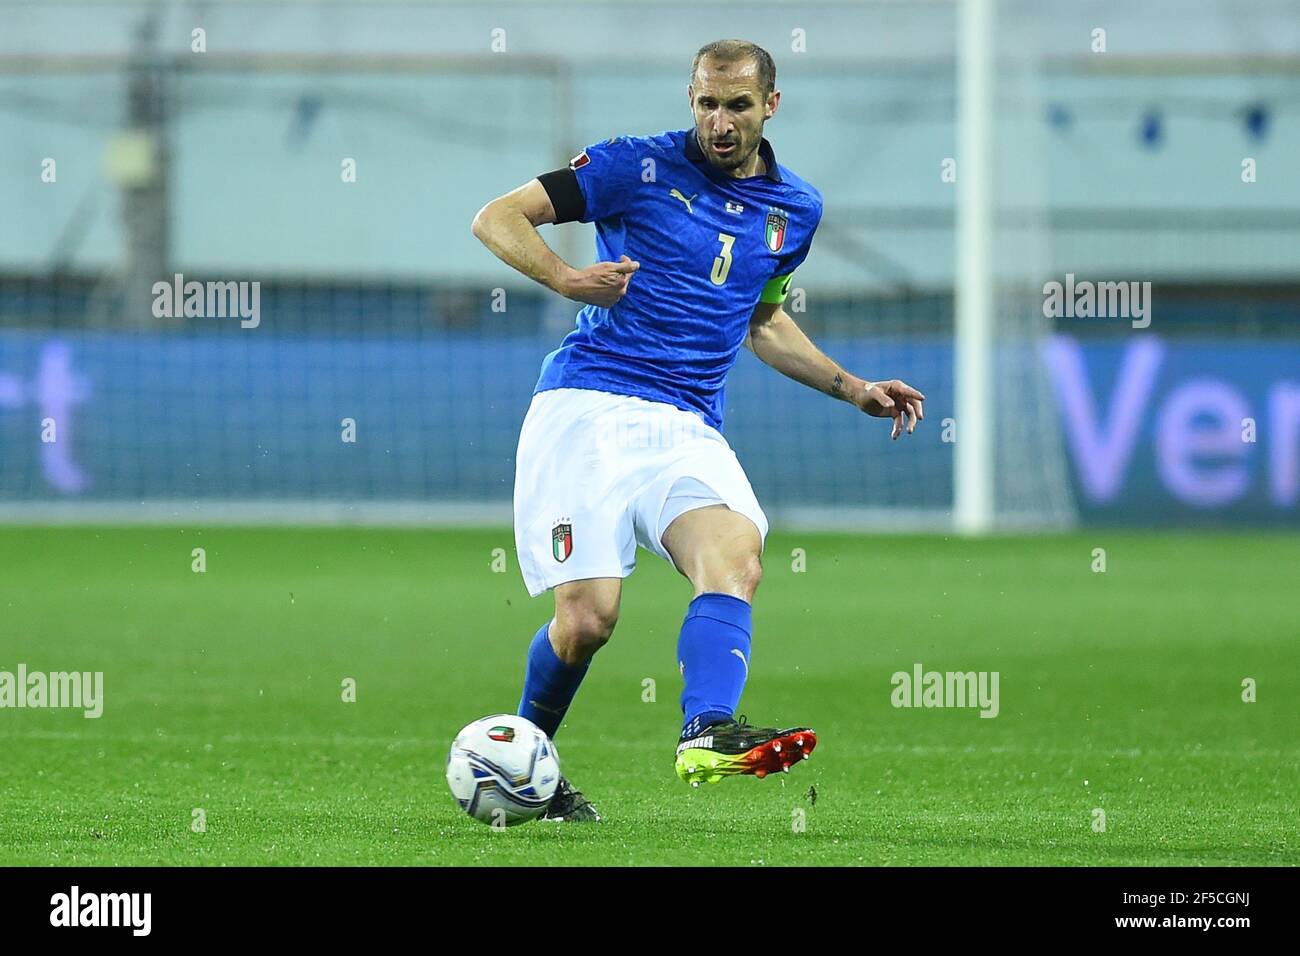 Parma, Emilia Romagna. 25th Mar, 2021. Giorgio Chiellini of Italy in action during the Qualification Fifa World Cup 2022 soccer match Italy vs North Ireland in the Ennio Tardini stadium in Parma, Italy, 25 March 2021. Fotografo01 Credit: Independent Photo Agency/Alamy Live News Stock Photo